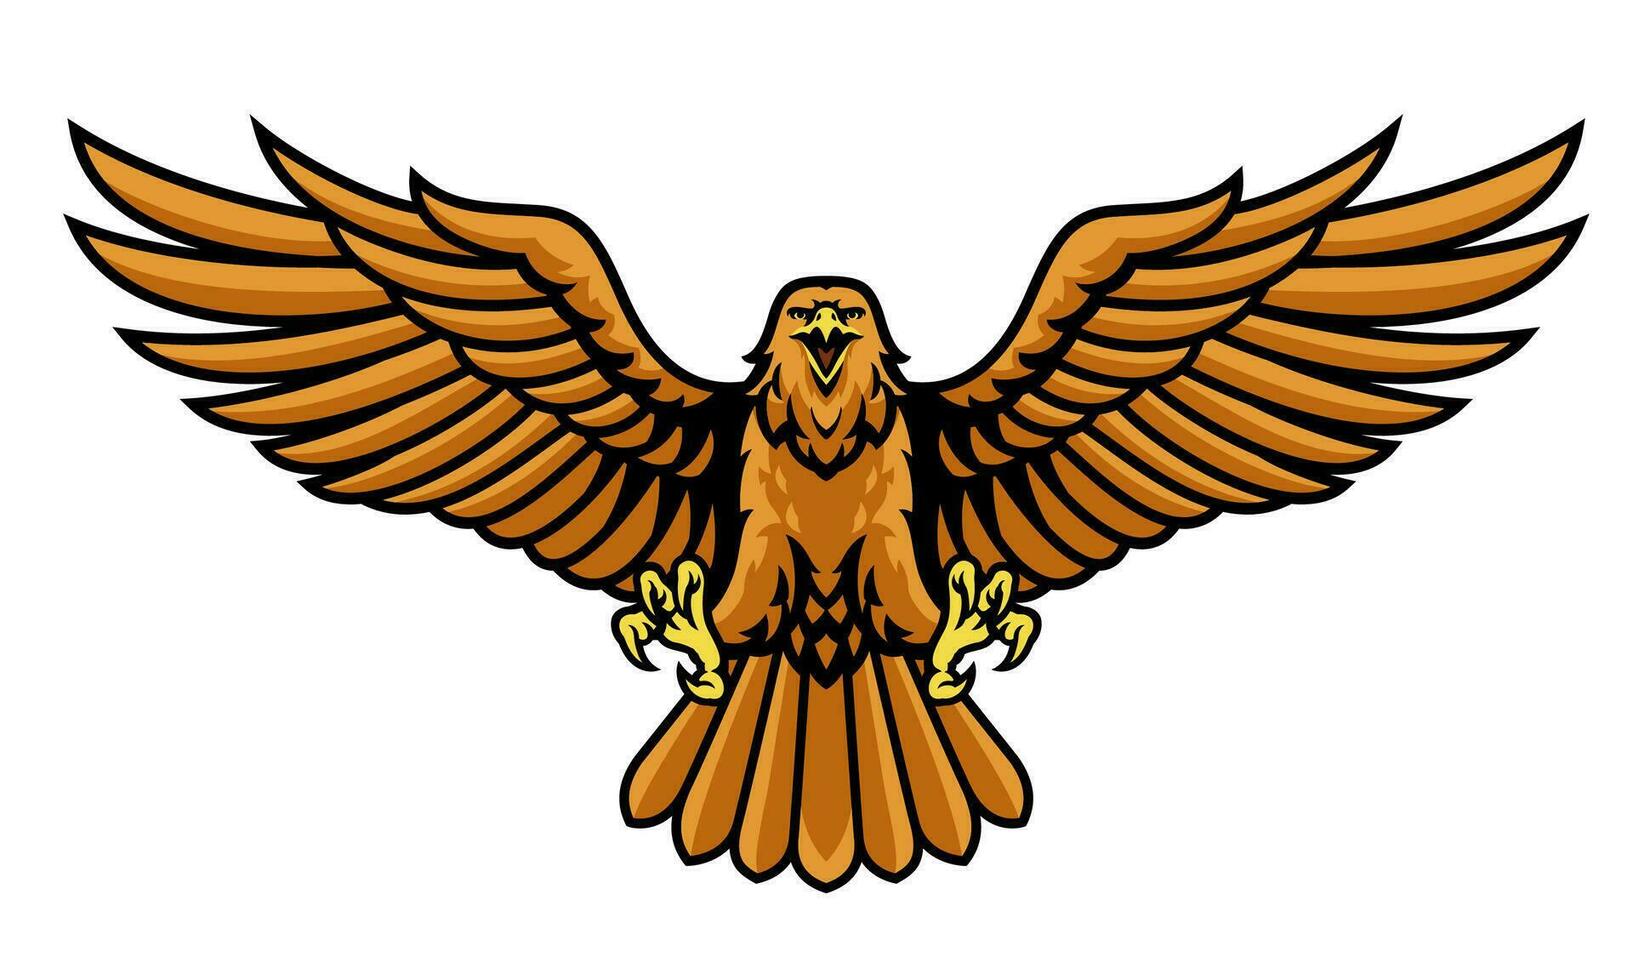 Majestic Golden Eagle Mascot Spreads Its Wings vector